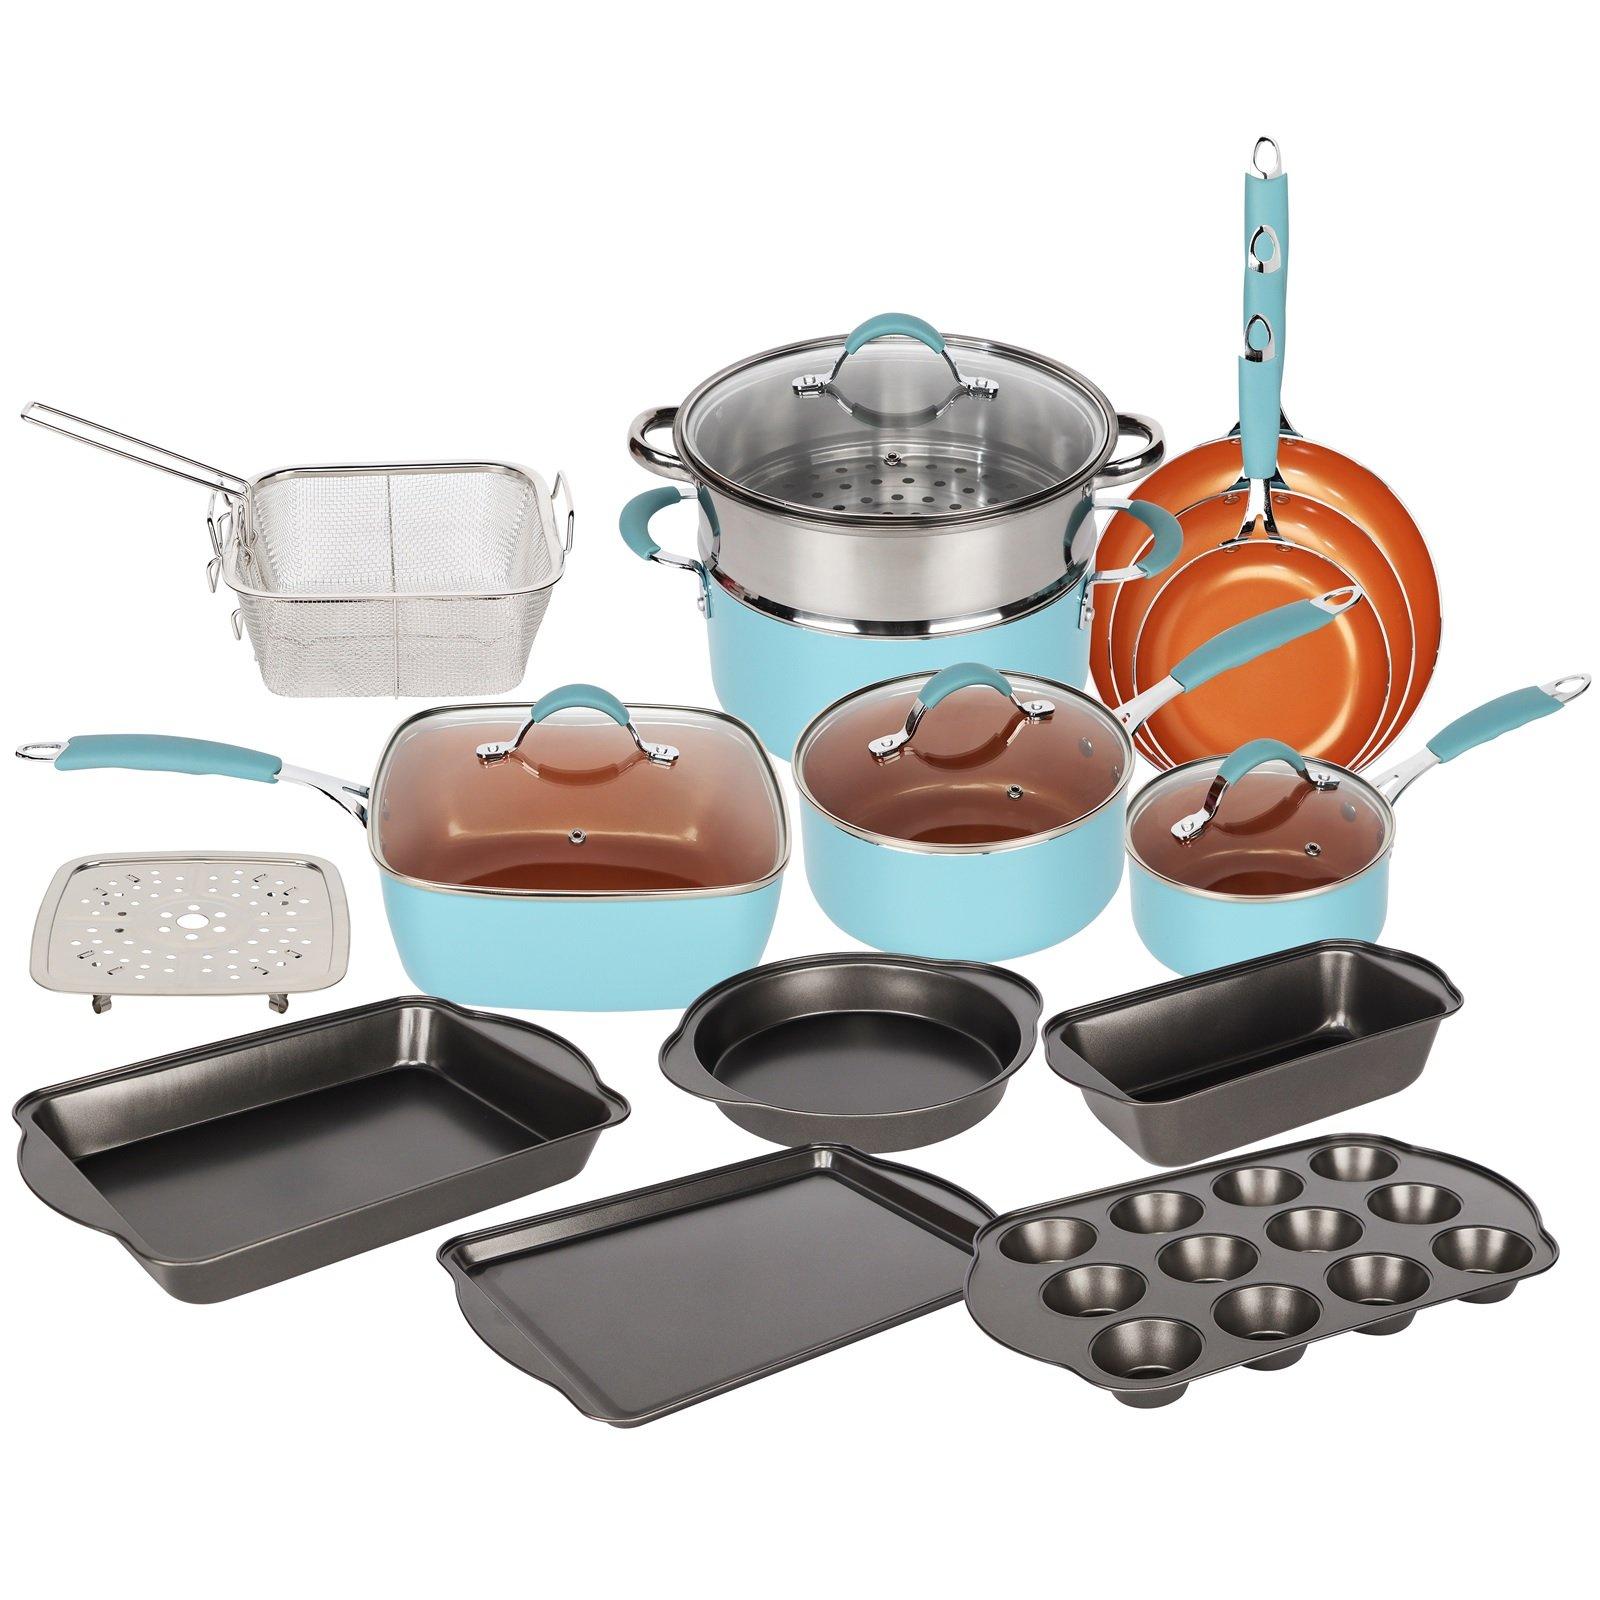 Blue and Copper Induction 19 Piece Non Stick Kitchen Cookware Bakeware Set